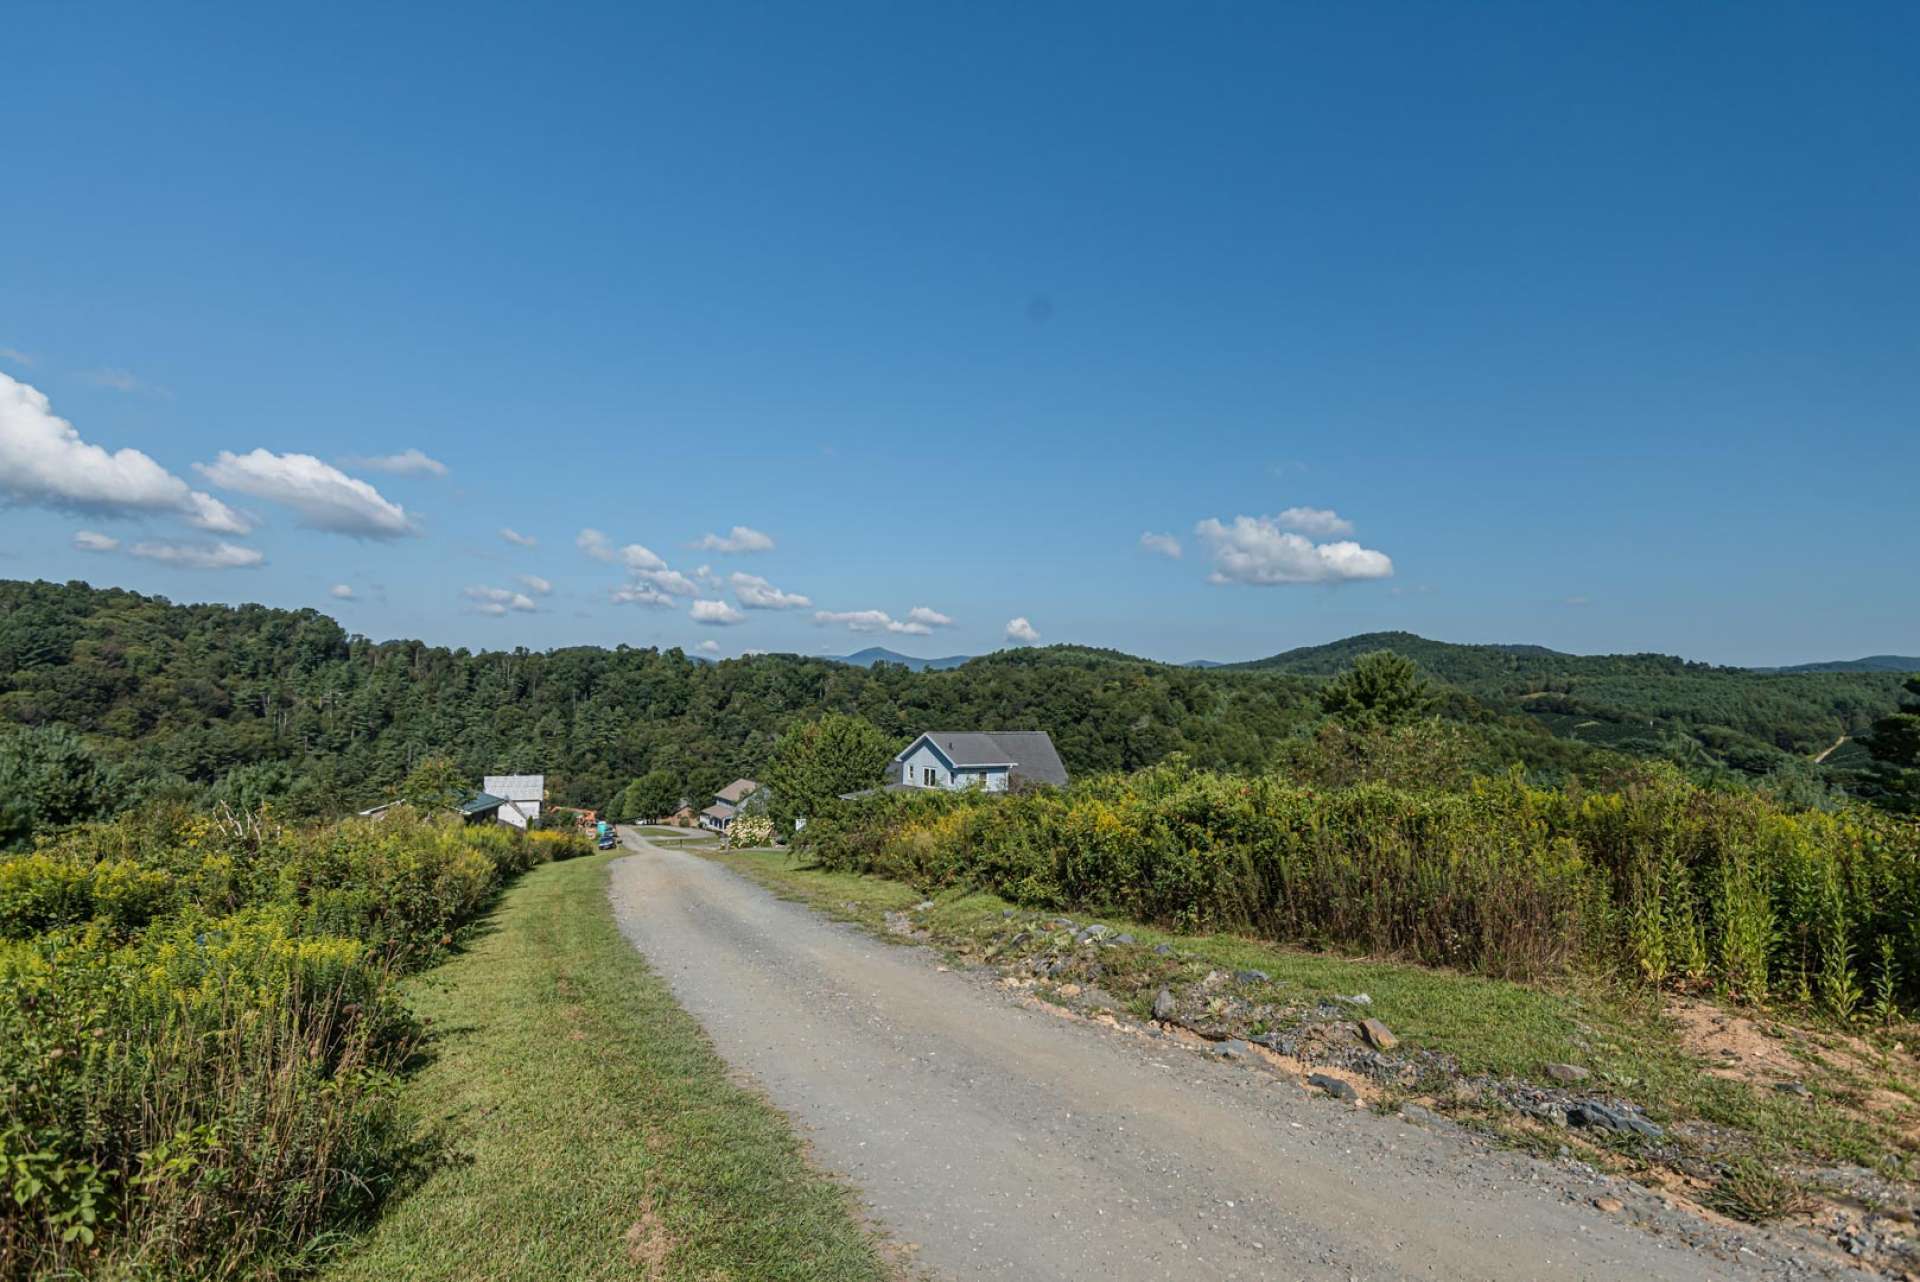 Green Meadows offers underground utilities, private roads, and common river access.